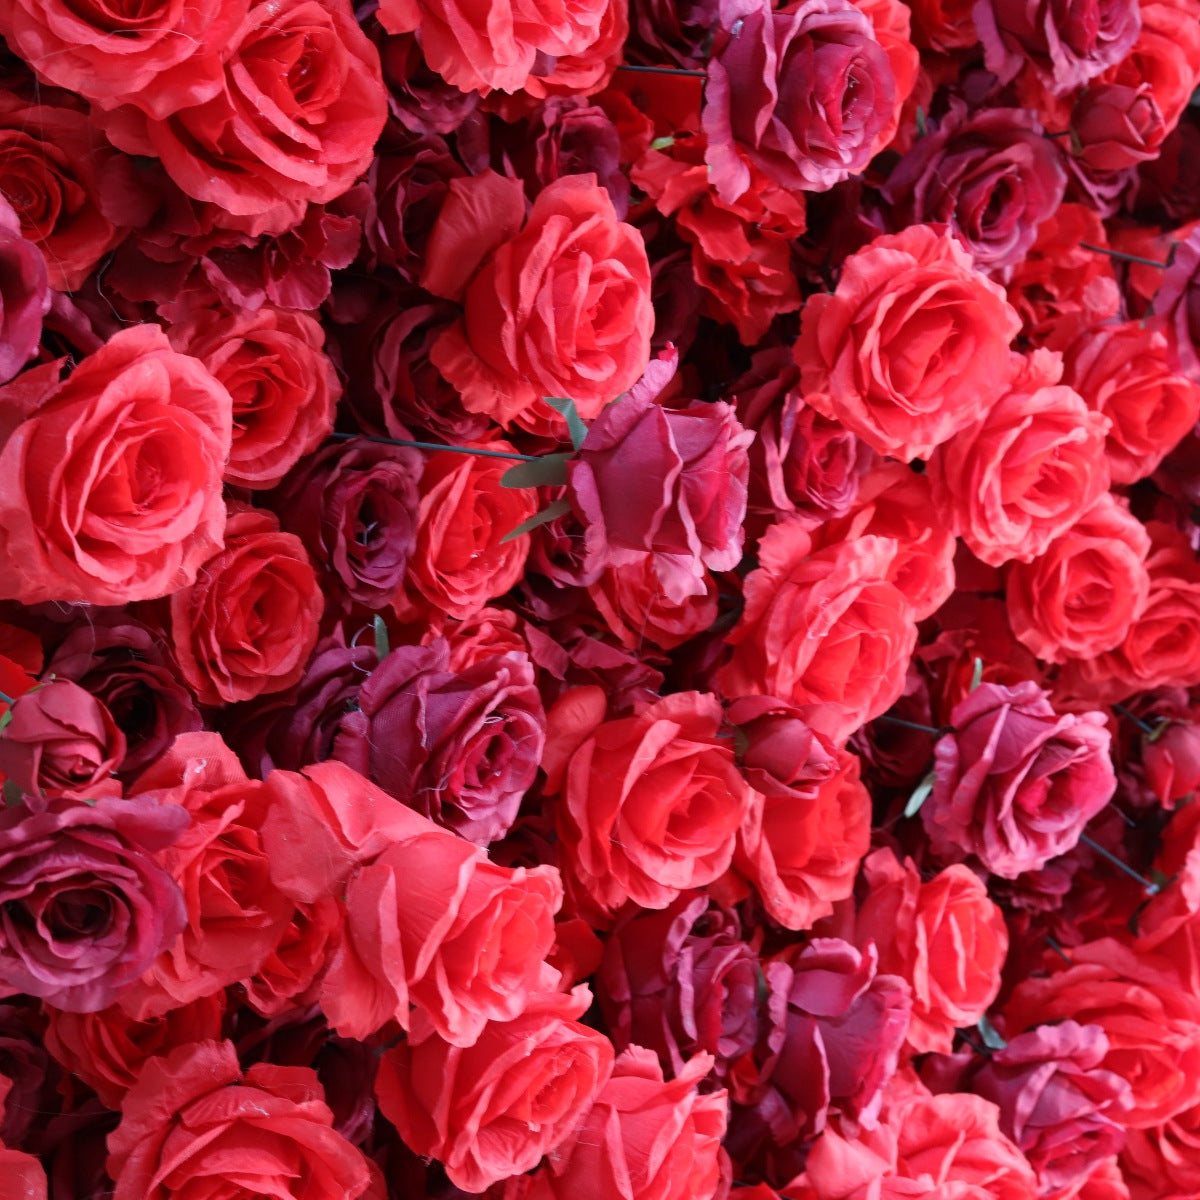  The red and wine red rose flower wall looks warm and realistic.